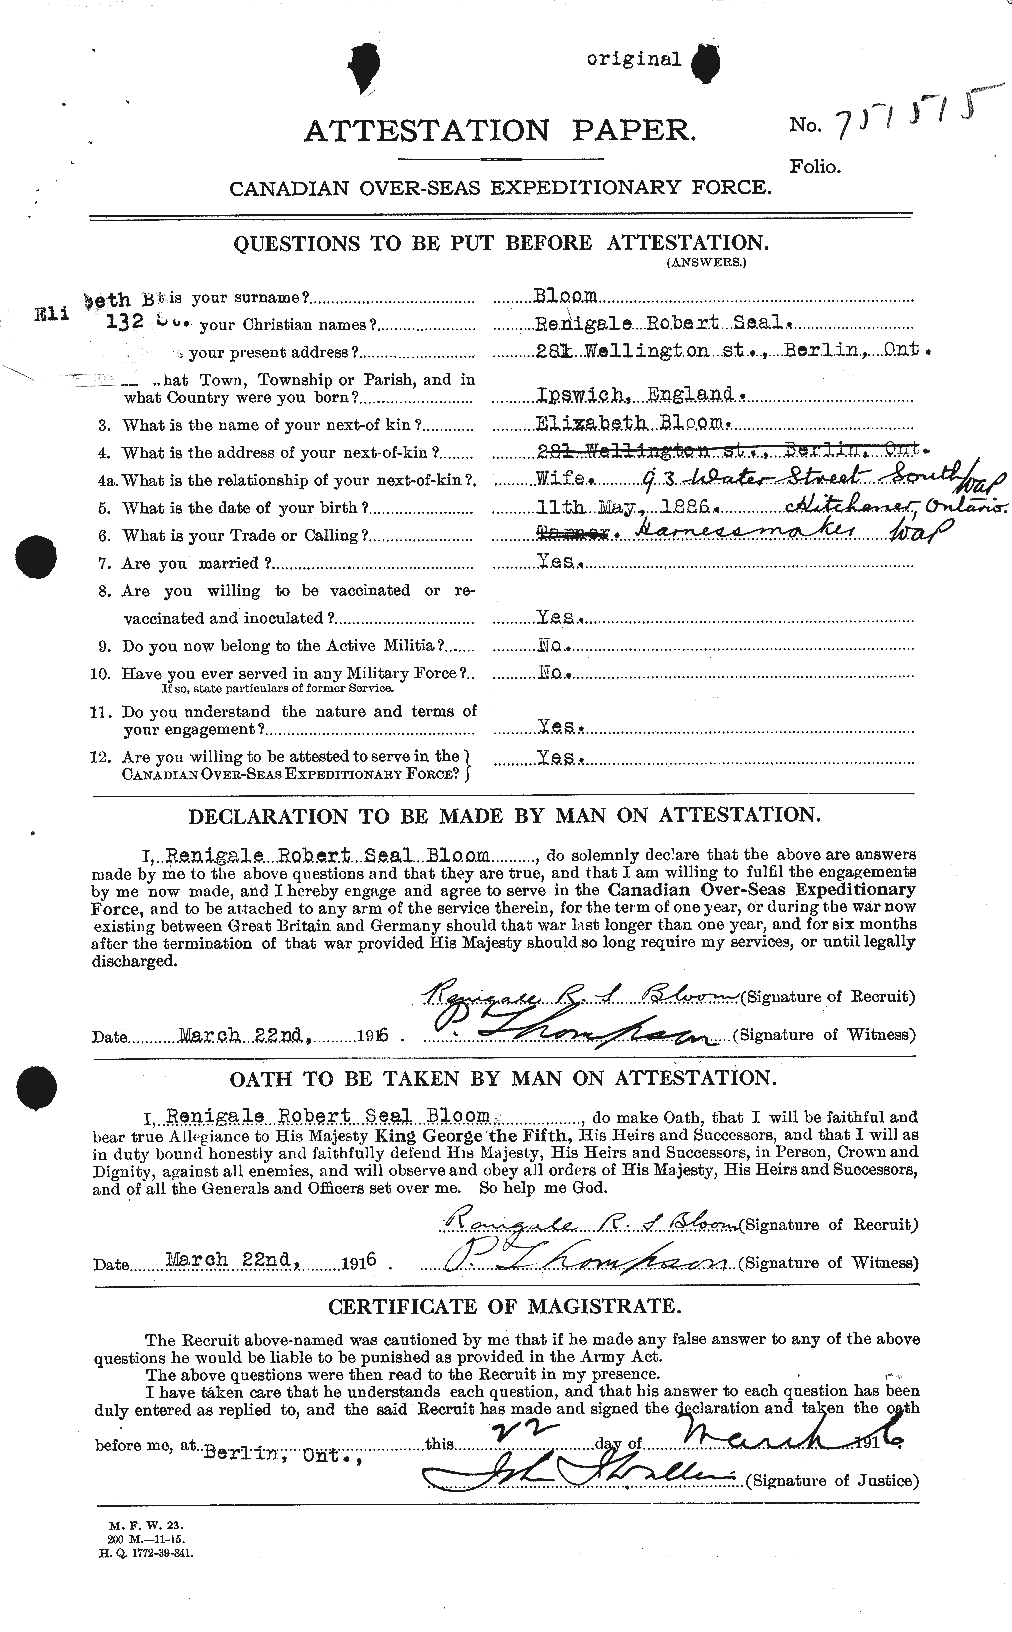 Personnel Records of the First World War - CEF 248572a